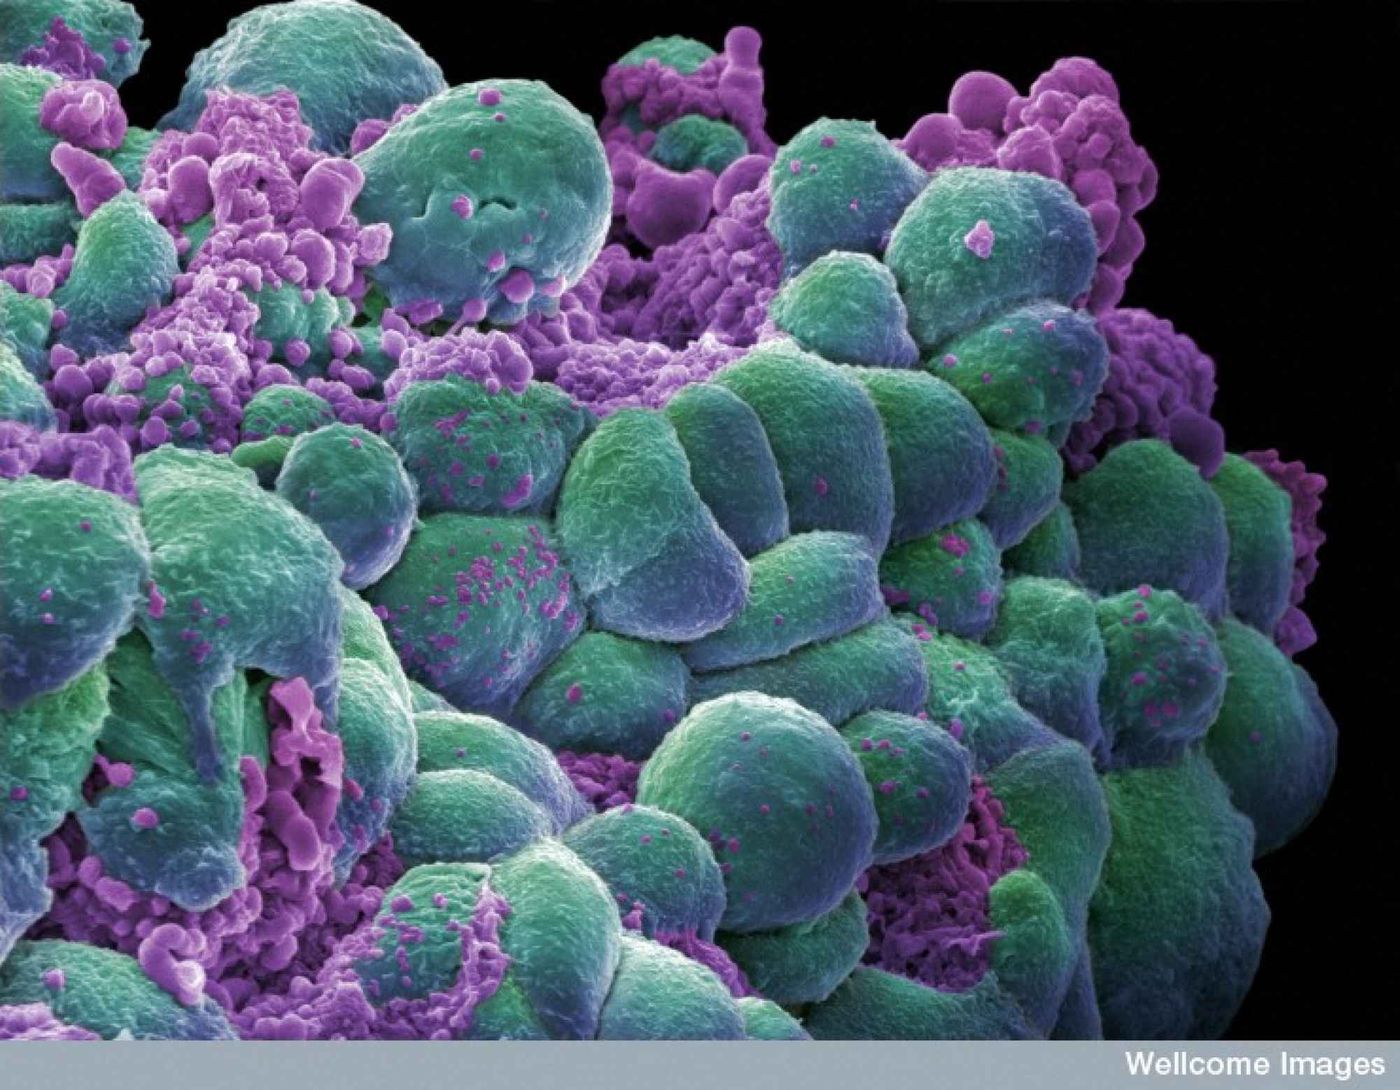 In this image, cancerous mammary cells have begun a process known as apoptosis, or programmed cell death.